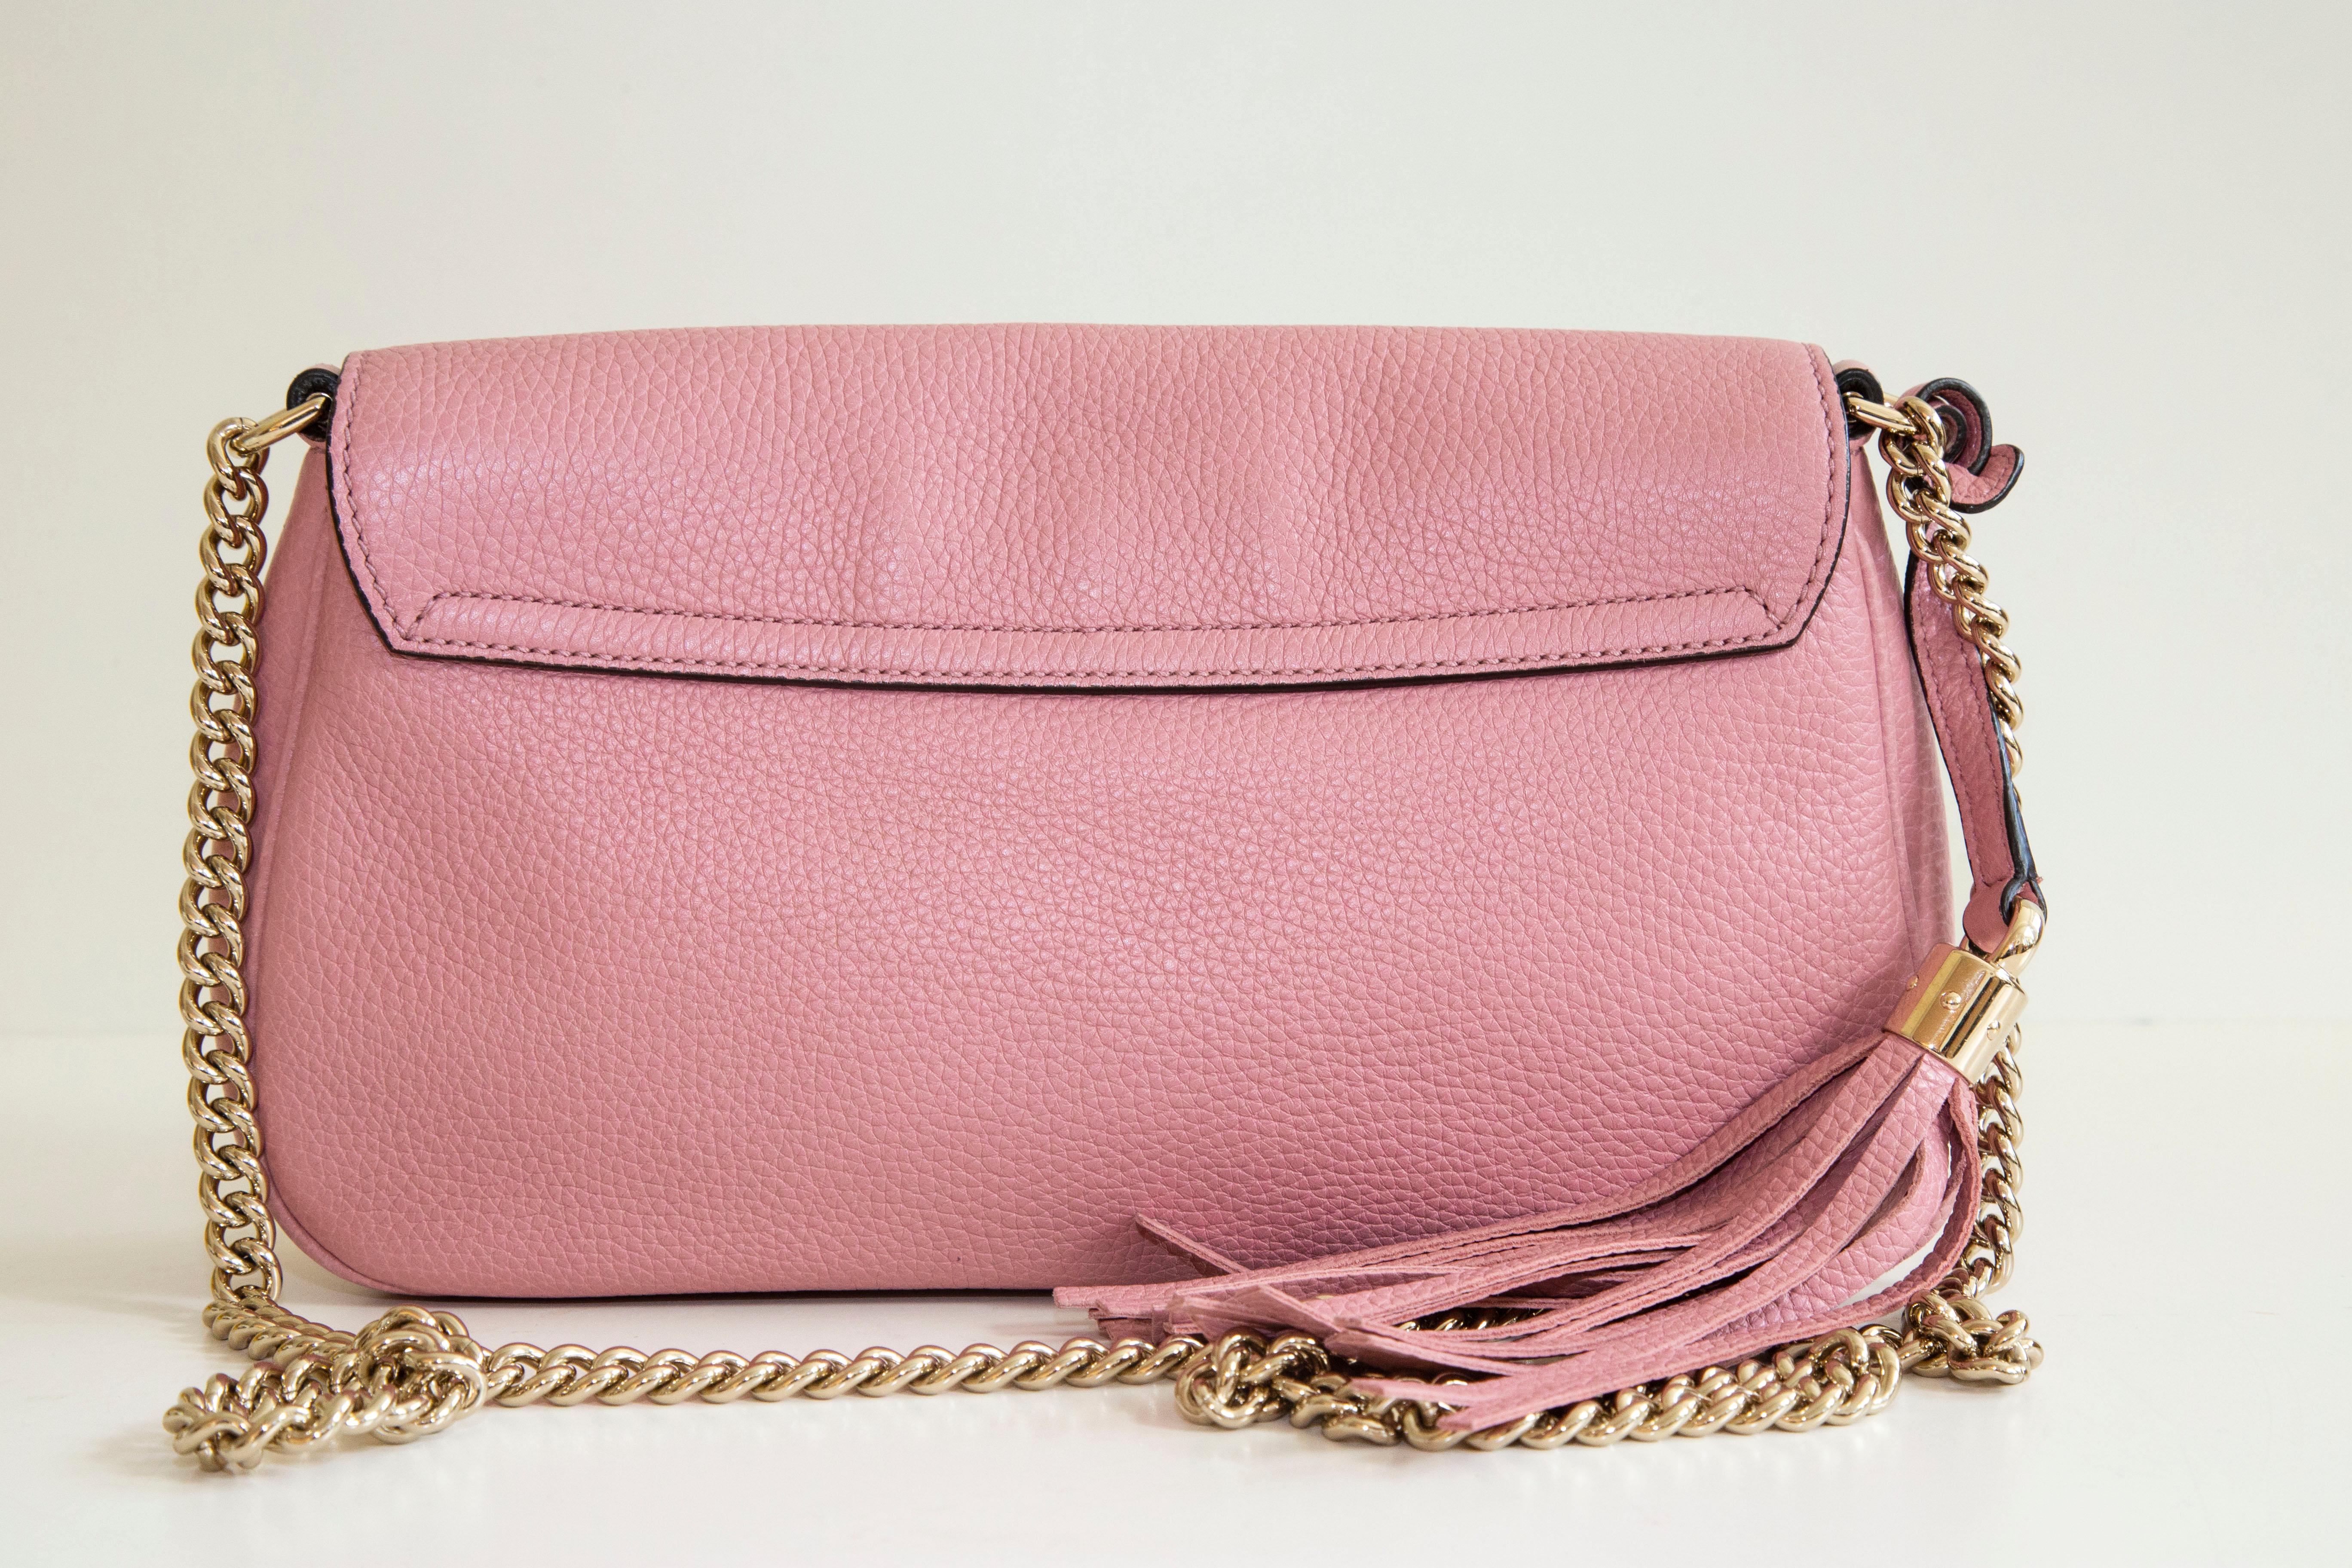 A Gucci Soho pink leather crossbody bag with chain strap. The bag features a front flap with a magnetic closure. The main compartment is lined with light beige fabric and it contains 2 side pockets of which one has a zipper. The interior is neat and